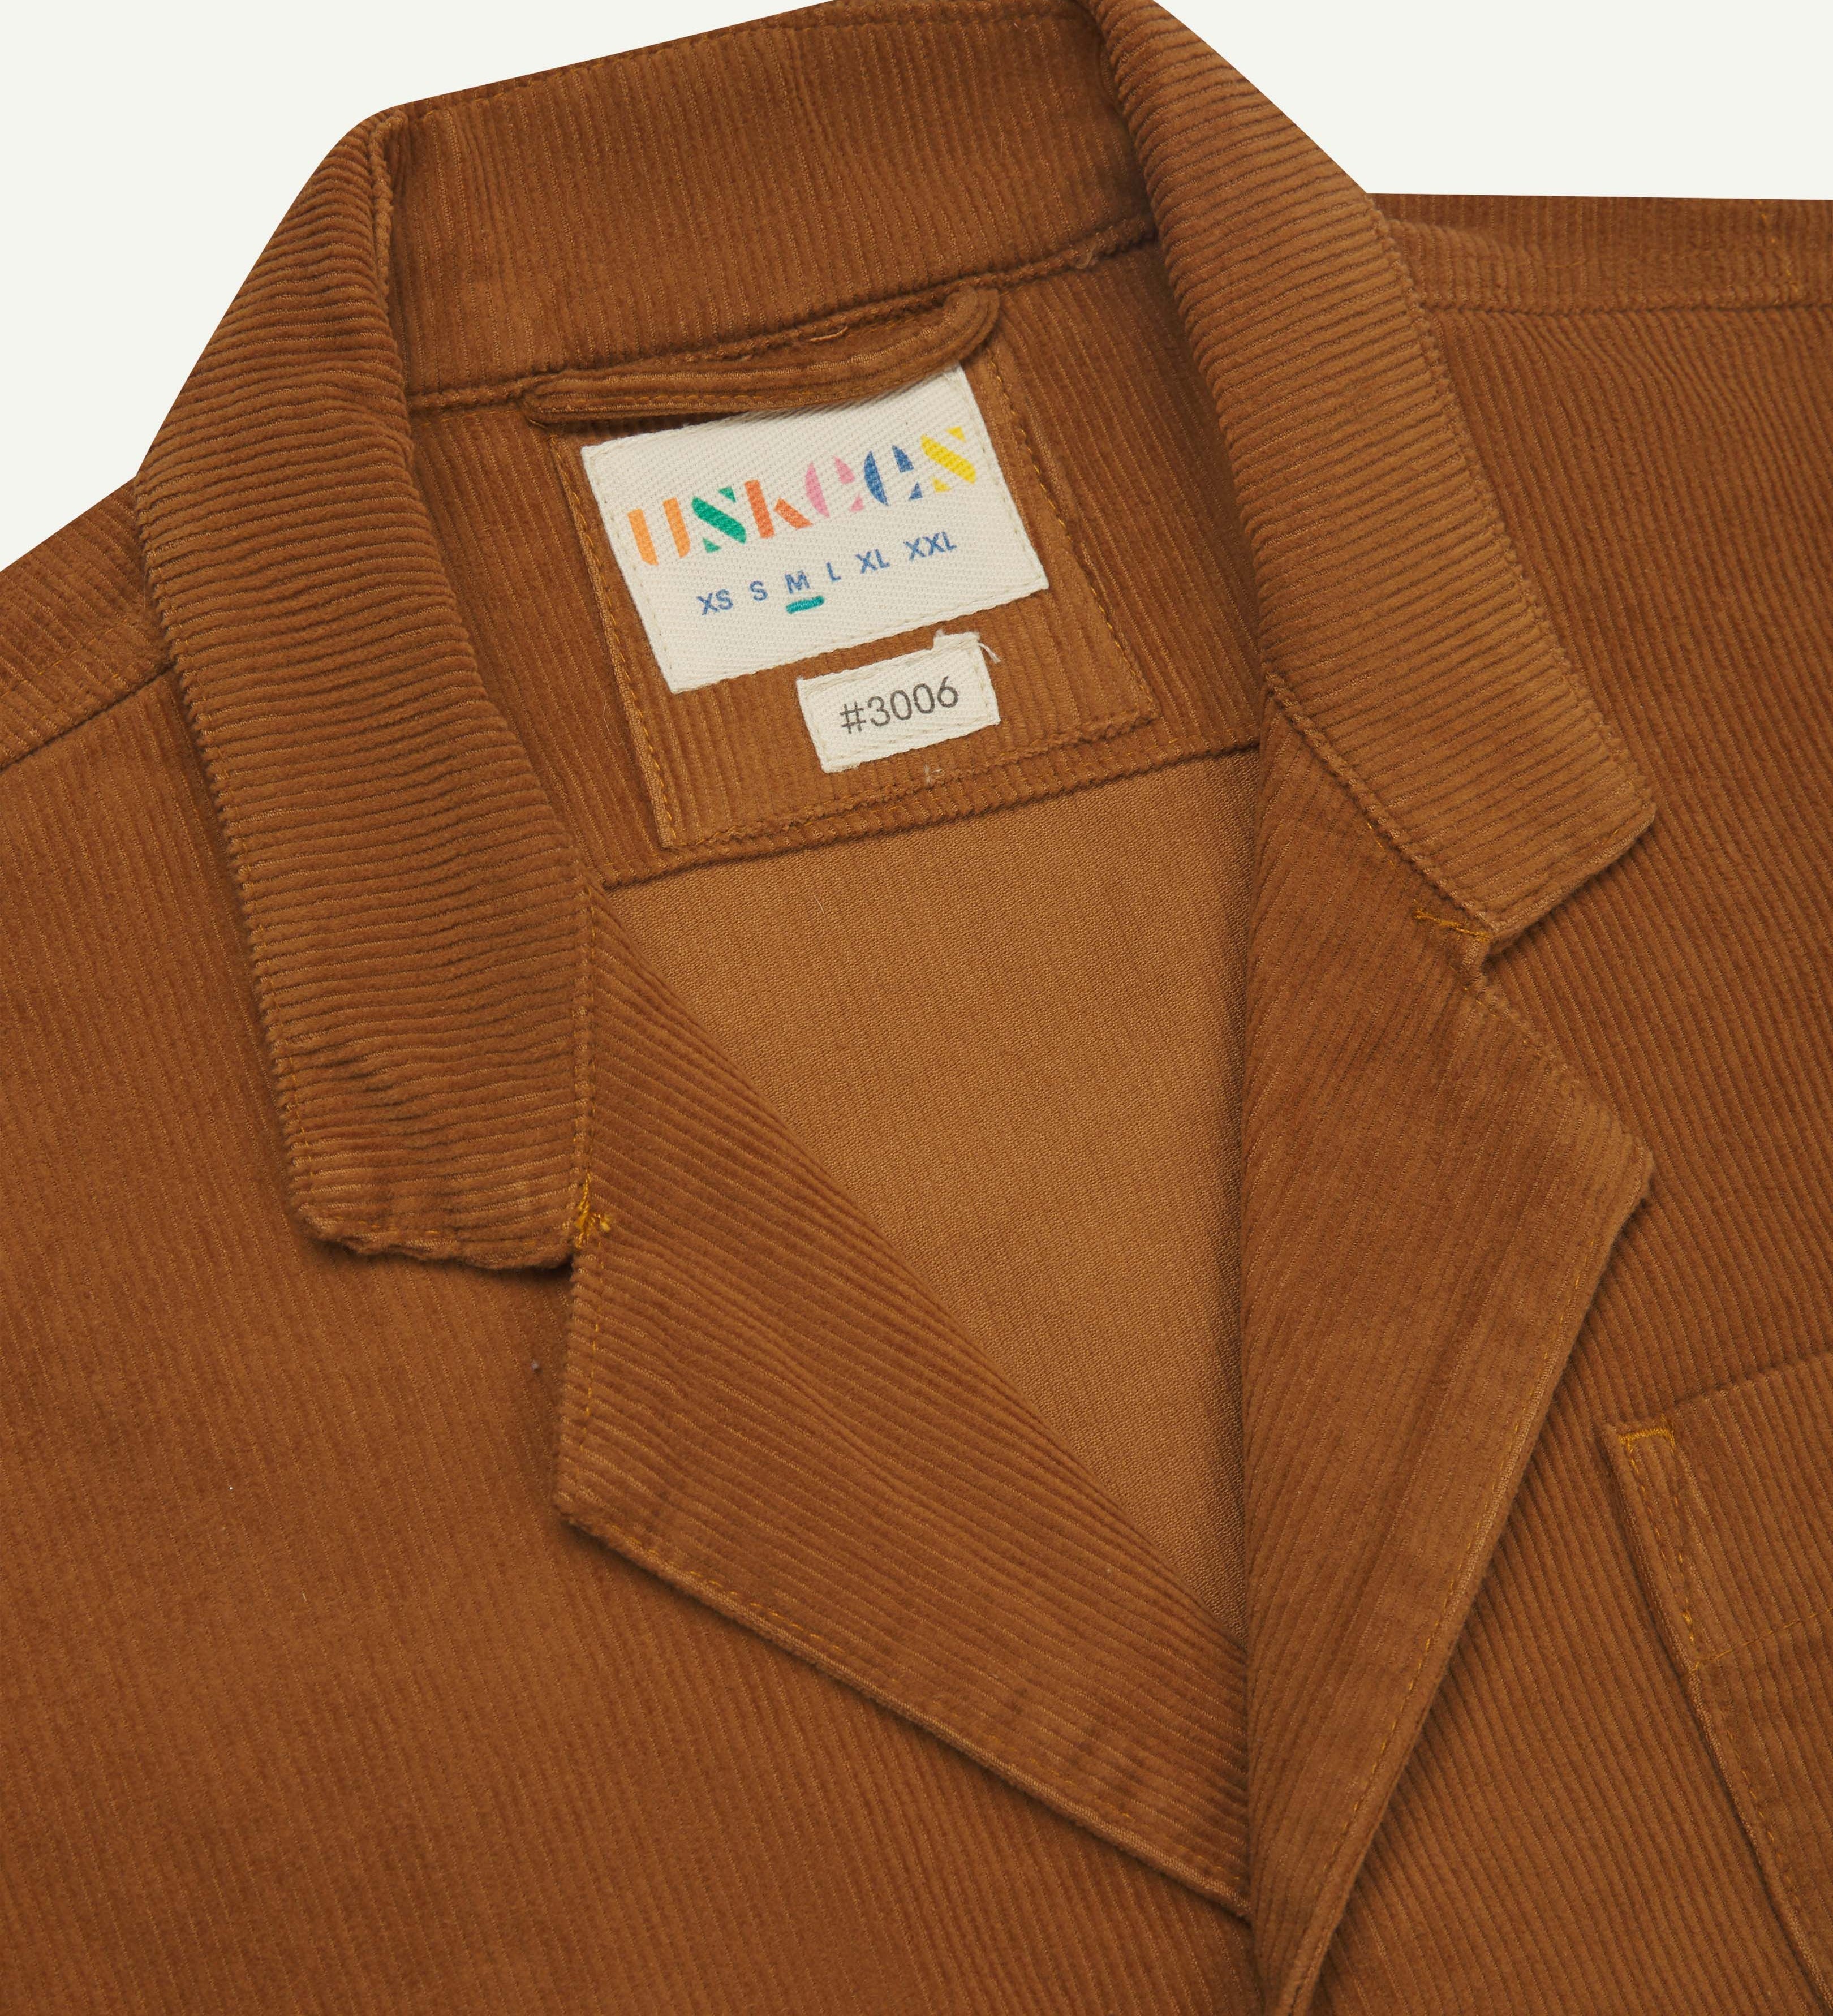 Front close-up view of tan corduroy blazer from Uskees, showing collar and brand label at neck.